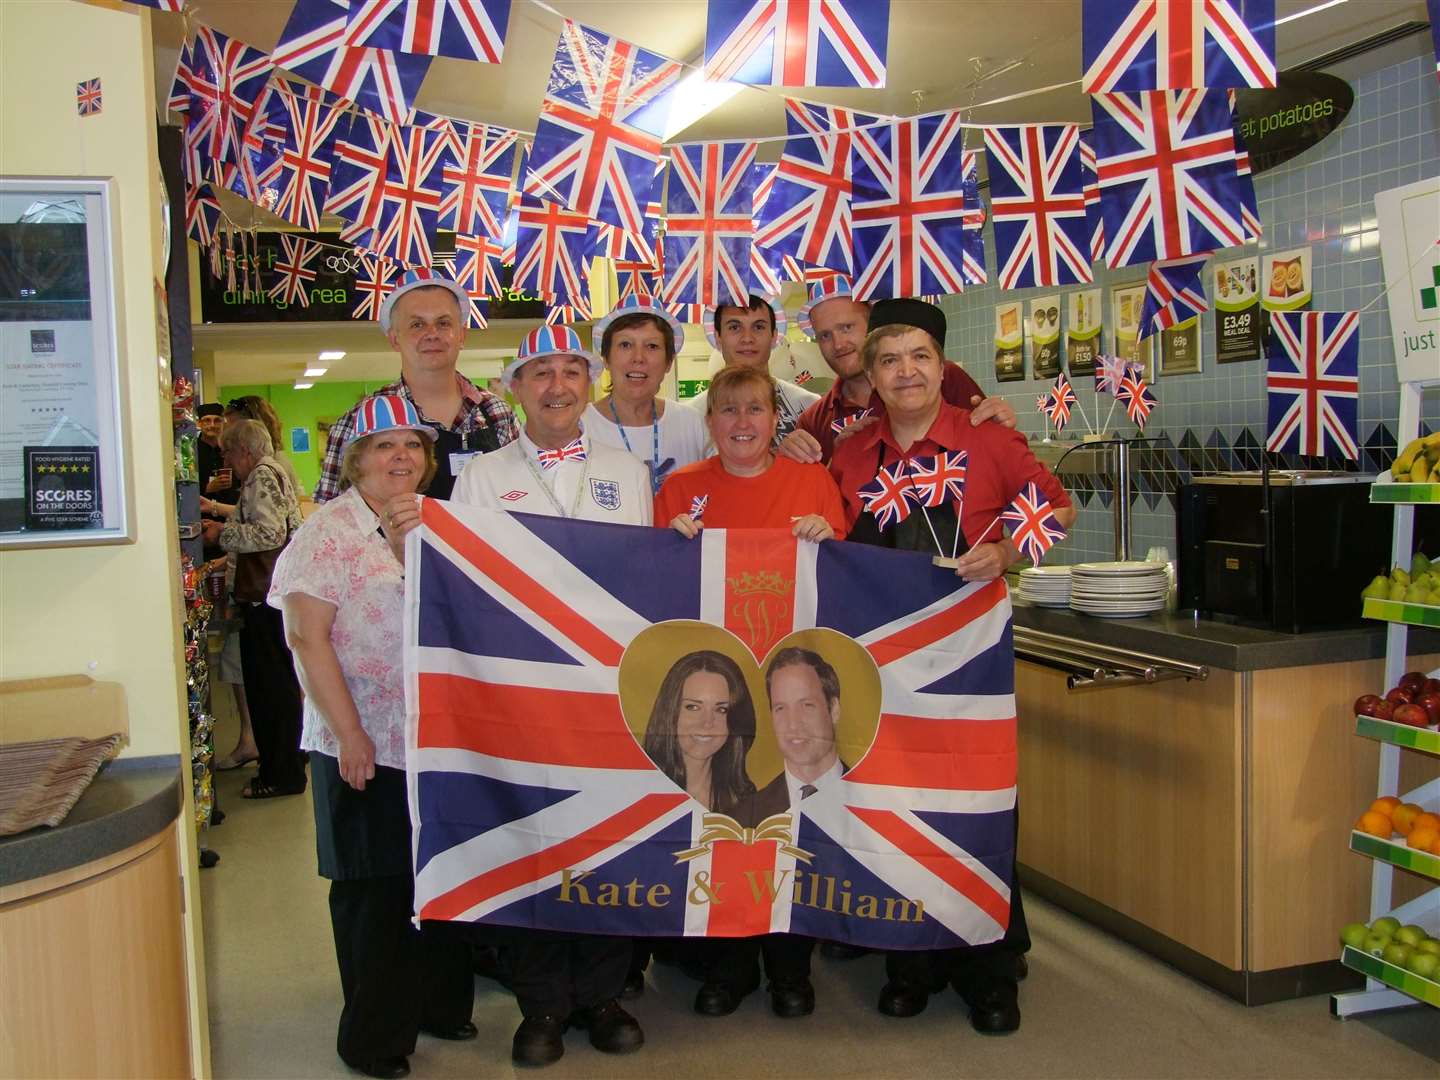 Kent and Canterbury Hospital restaurant staff are pictured with their royal wedding decorations